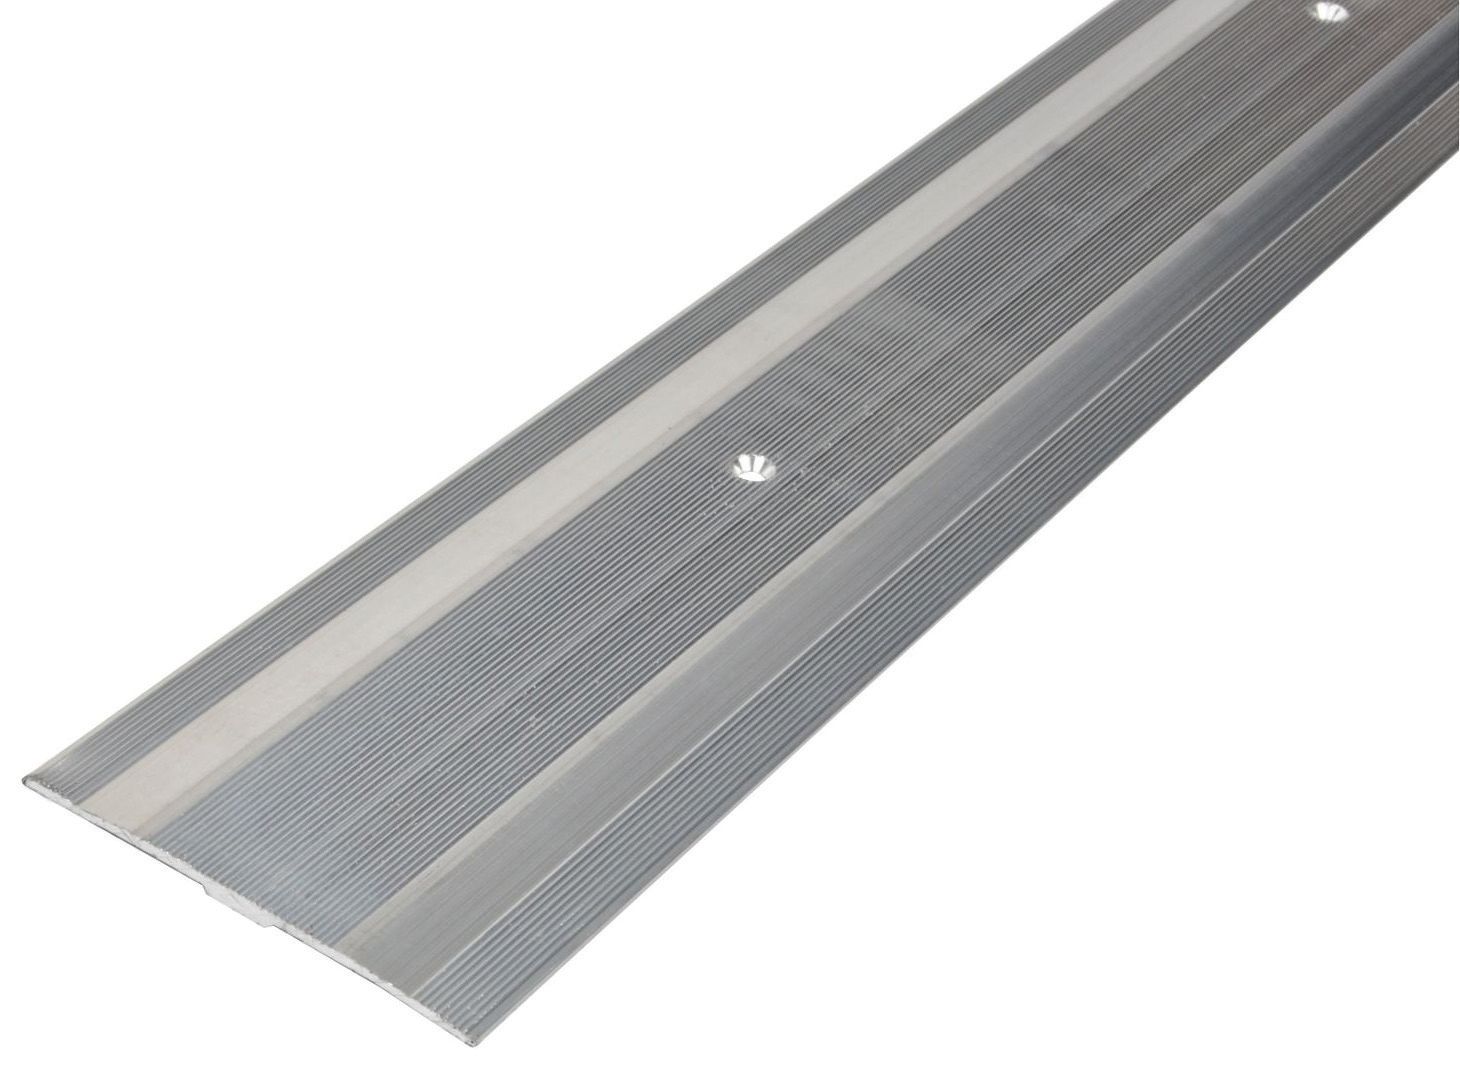 Vitrex Extra Wide Silver Flooring Cover Strip - 900mm